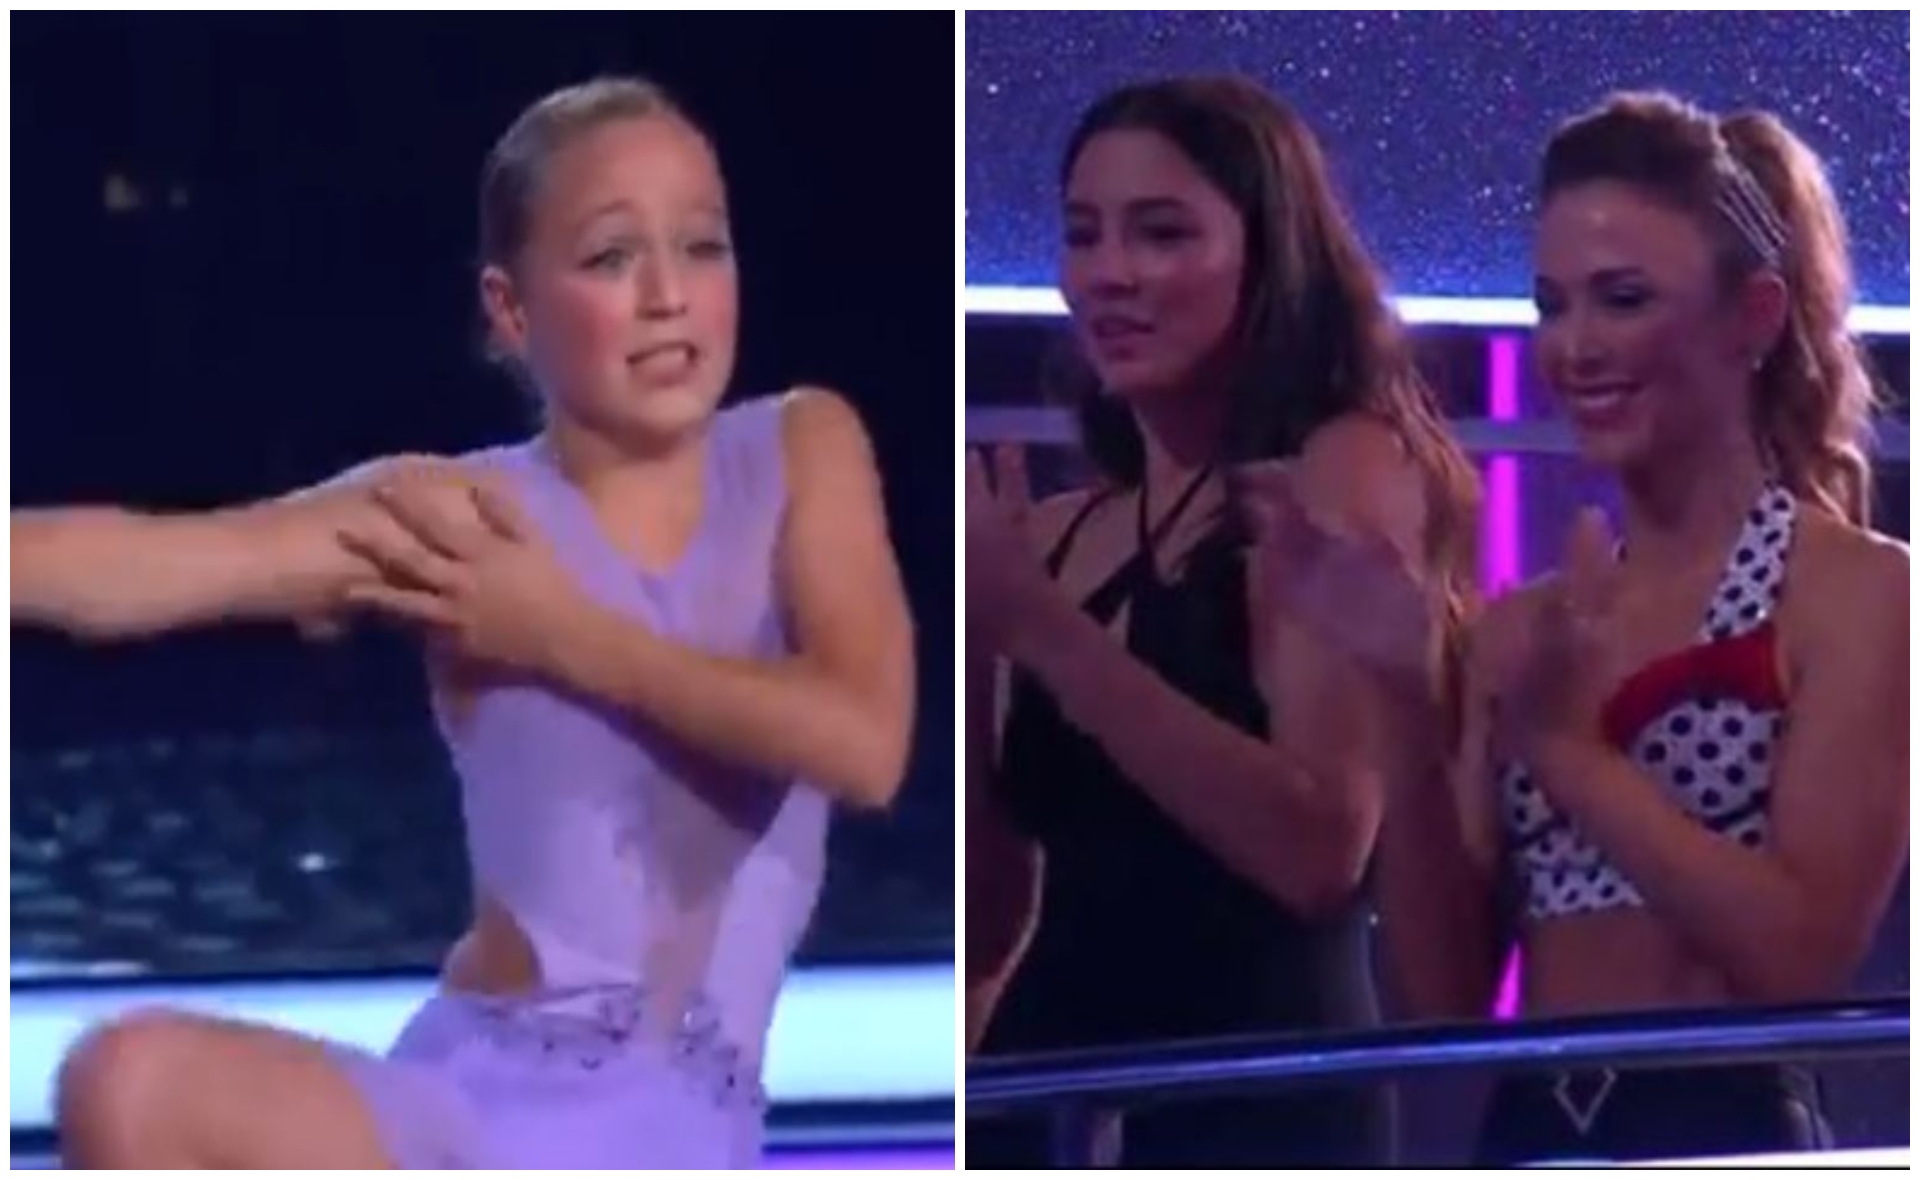 Proving she’s really just like her mum, Bec Hewitt’s daughter Ava just took the Dancing With The Stars stage by storm